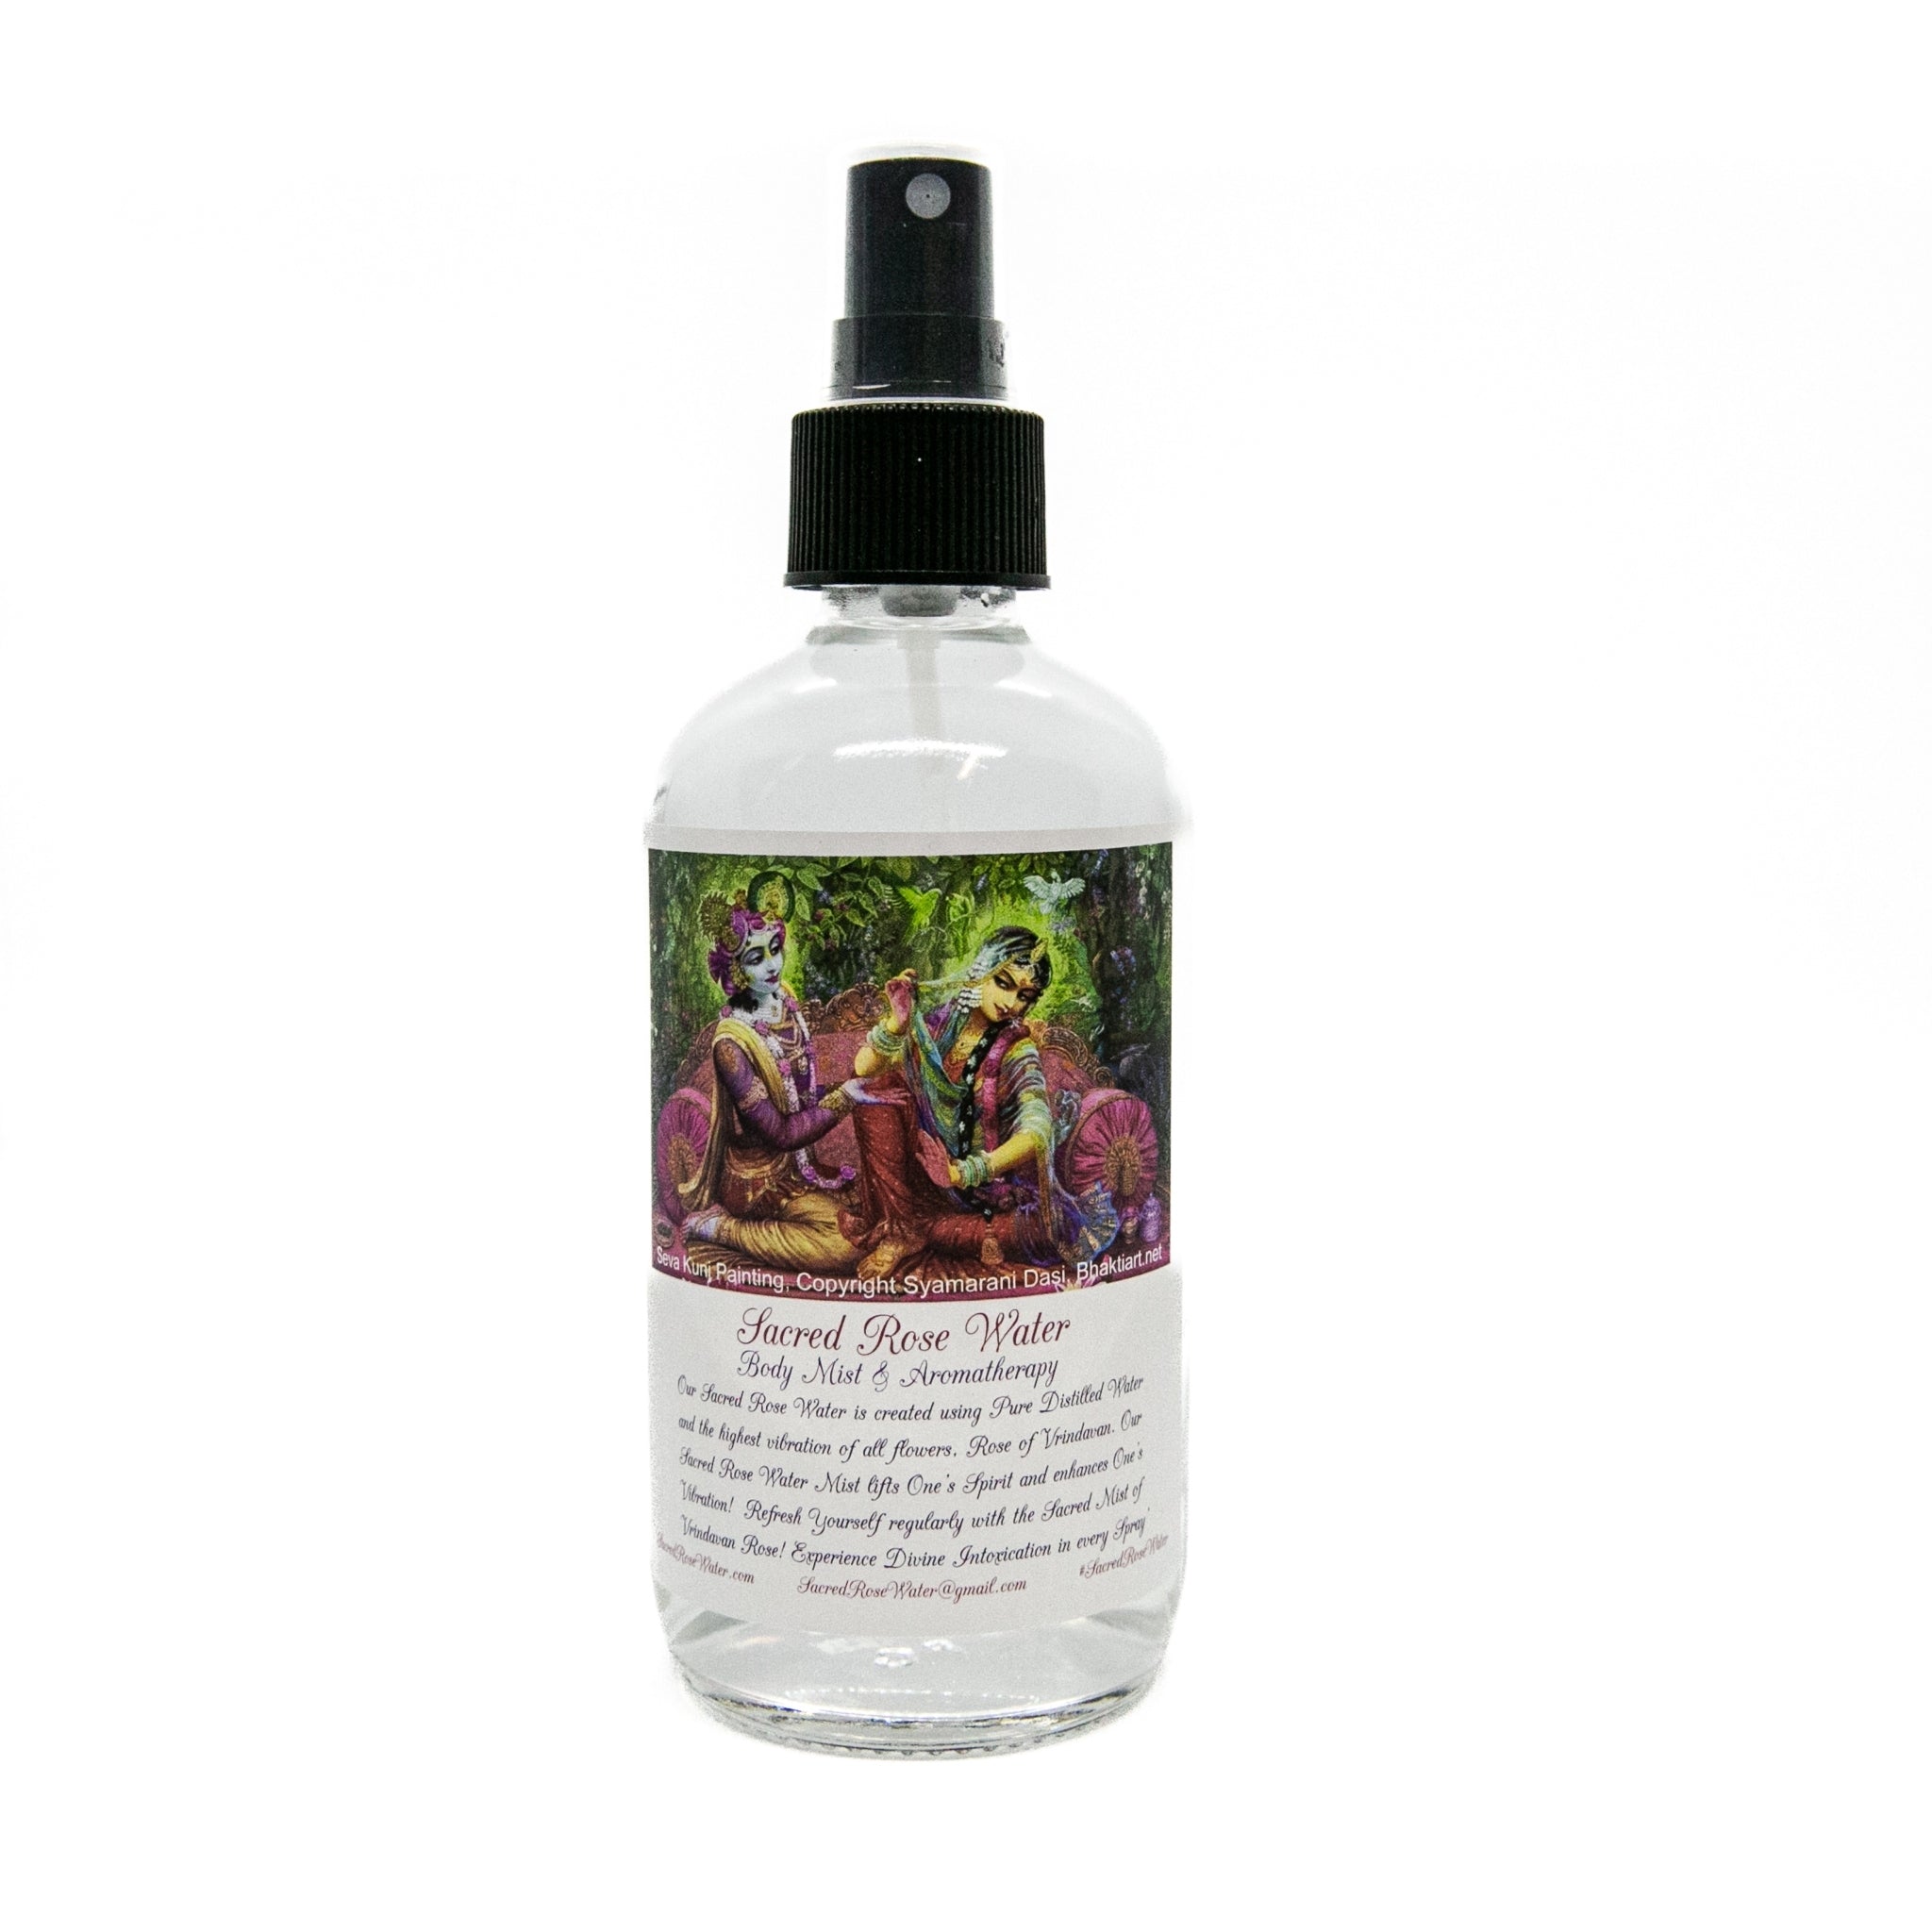 Sacred Rose Water Body Mist & Aromatherapy